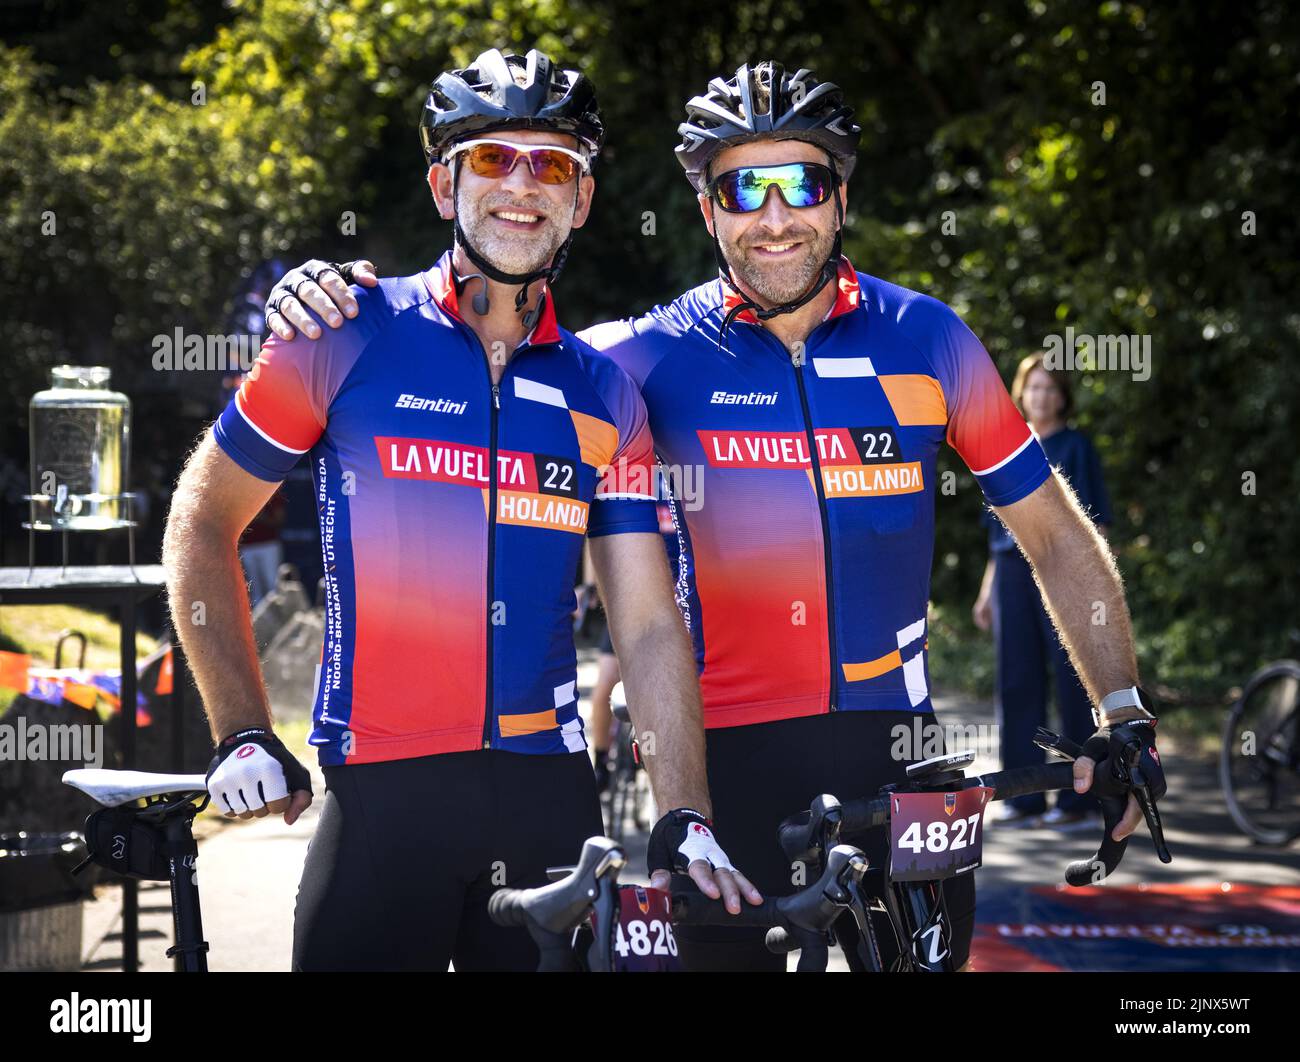 2022-08-14 12:30:21 BUNNIK - Huog de Jonge together with his brother while cycling the touring version of the Vuelta. Several politicians, along with thousands of other amateurs, explore the first stage of the Spanish cycling tour. ANP RAMON VAN FLYMEN netherlands out - belgium out Stock Photo